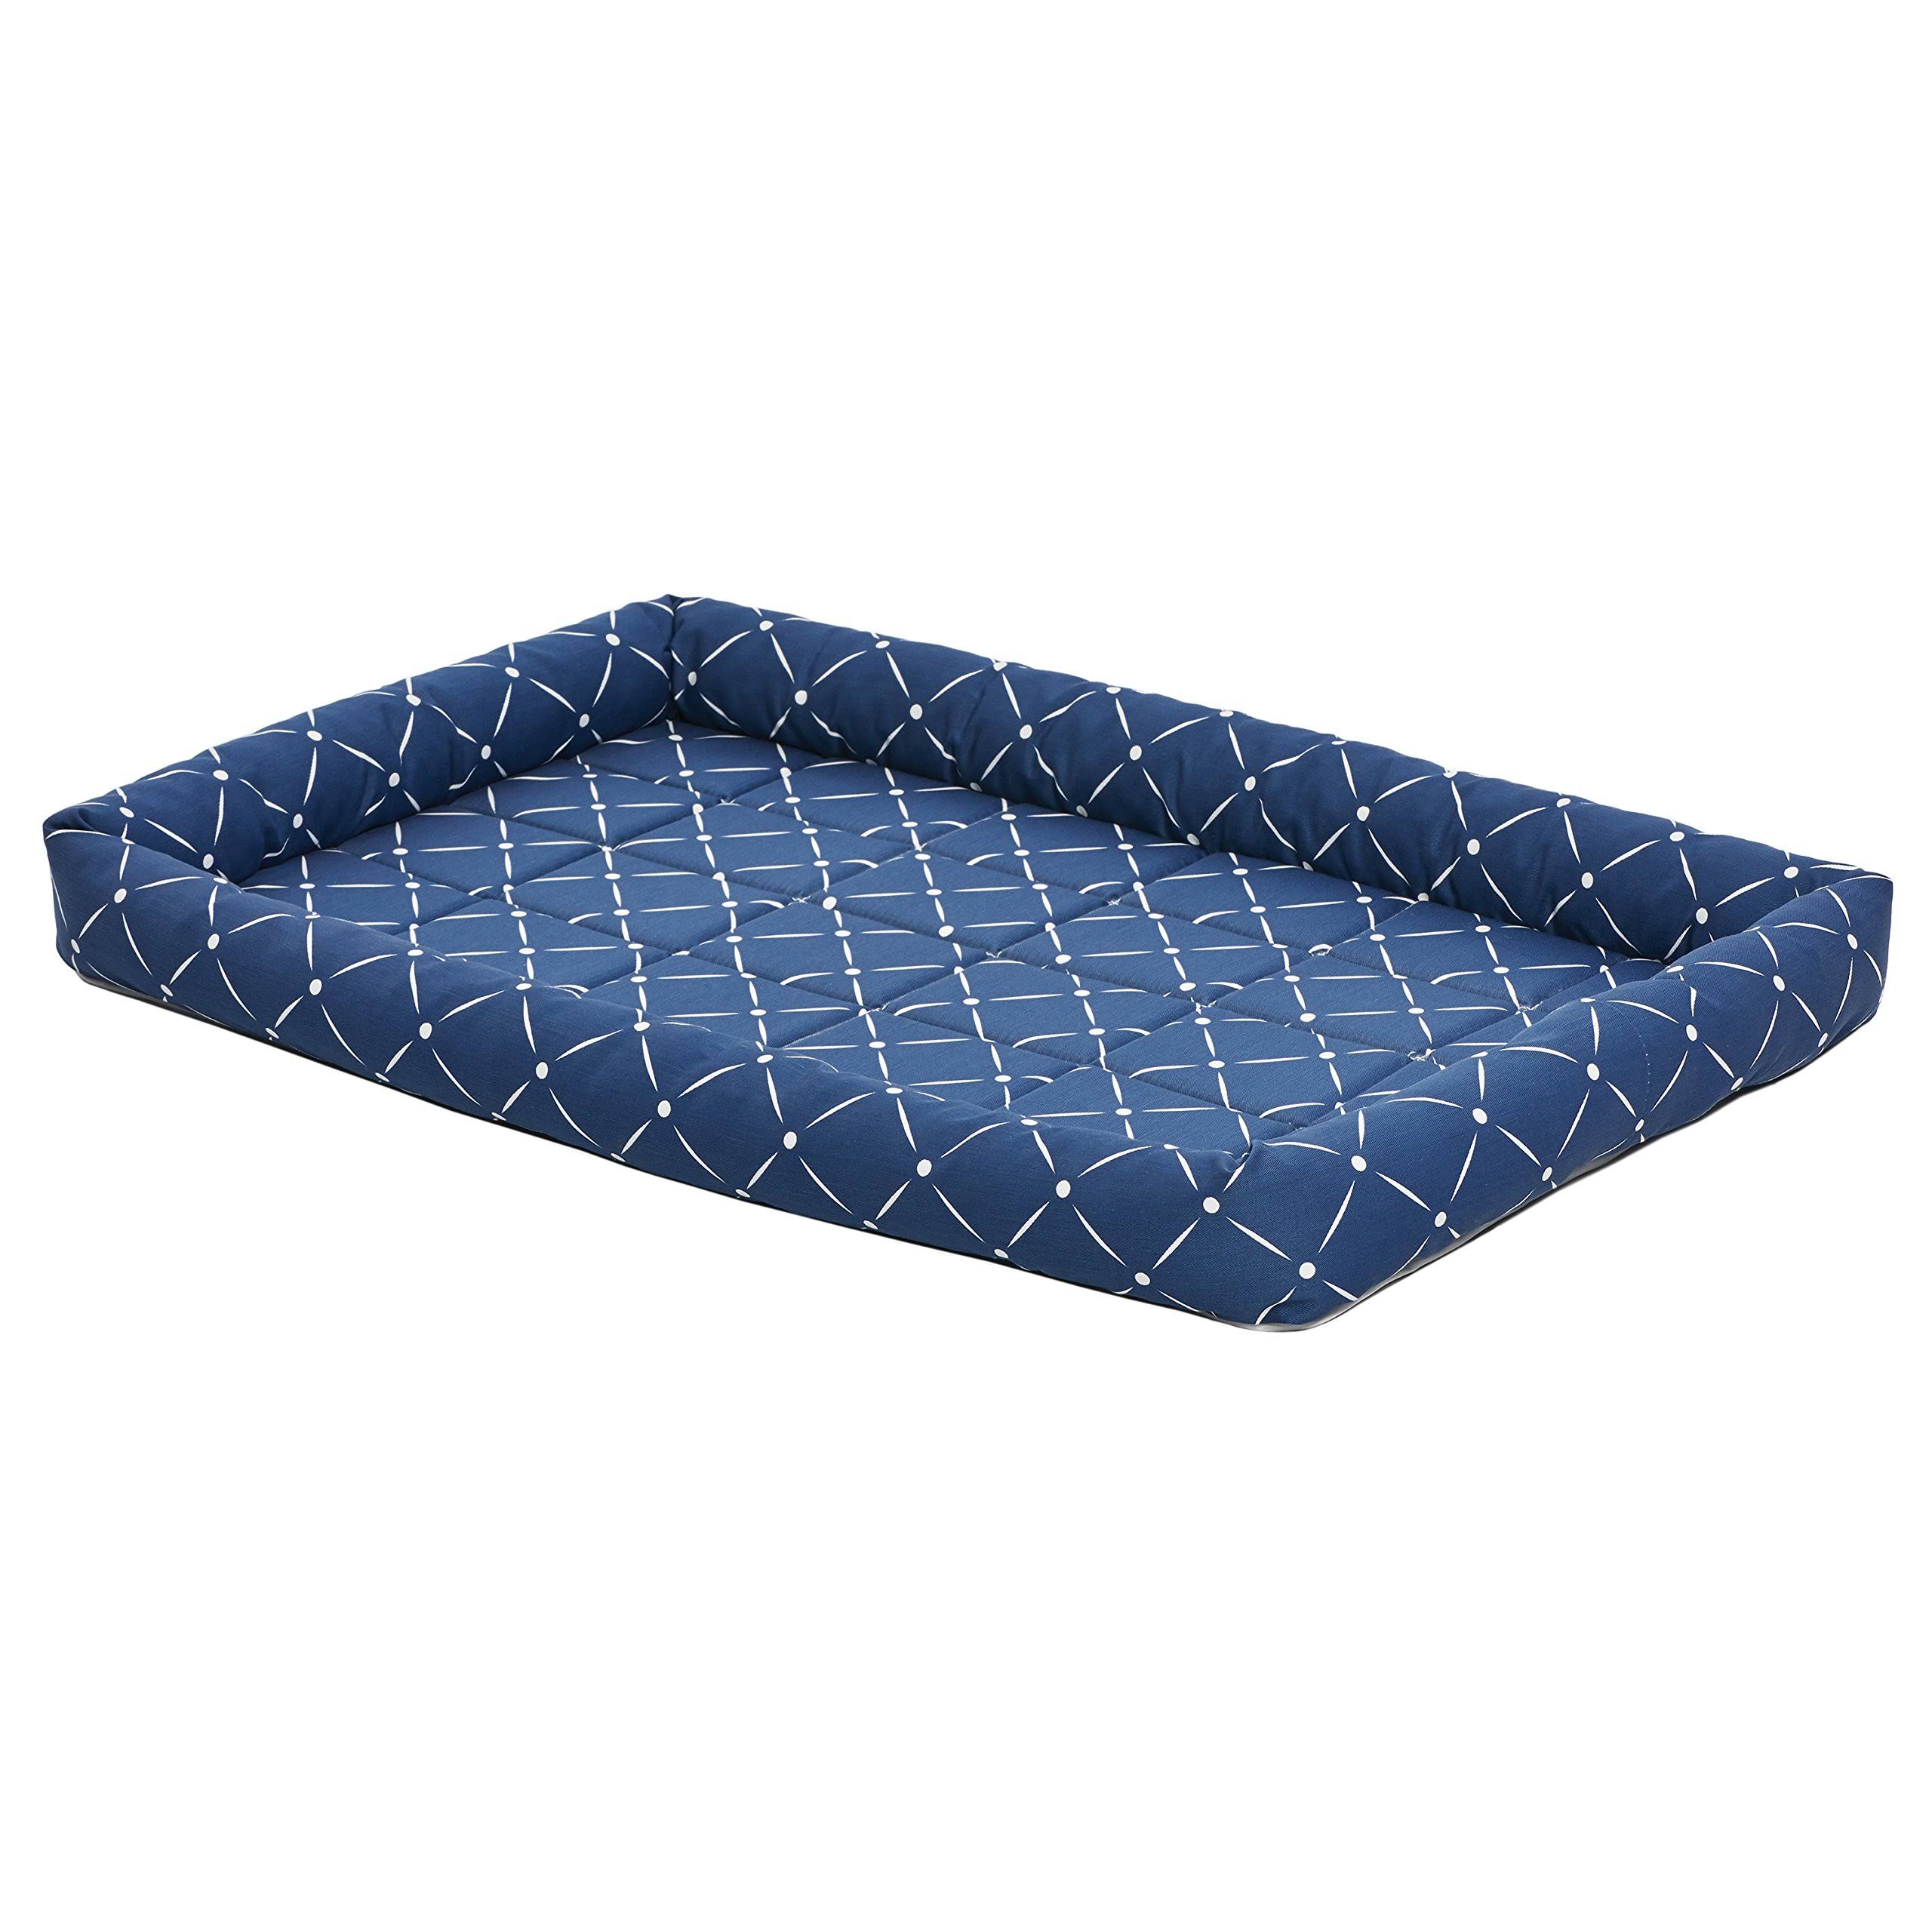 QuietTime Couture Ashton Bolster Bed Blue - 36 in